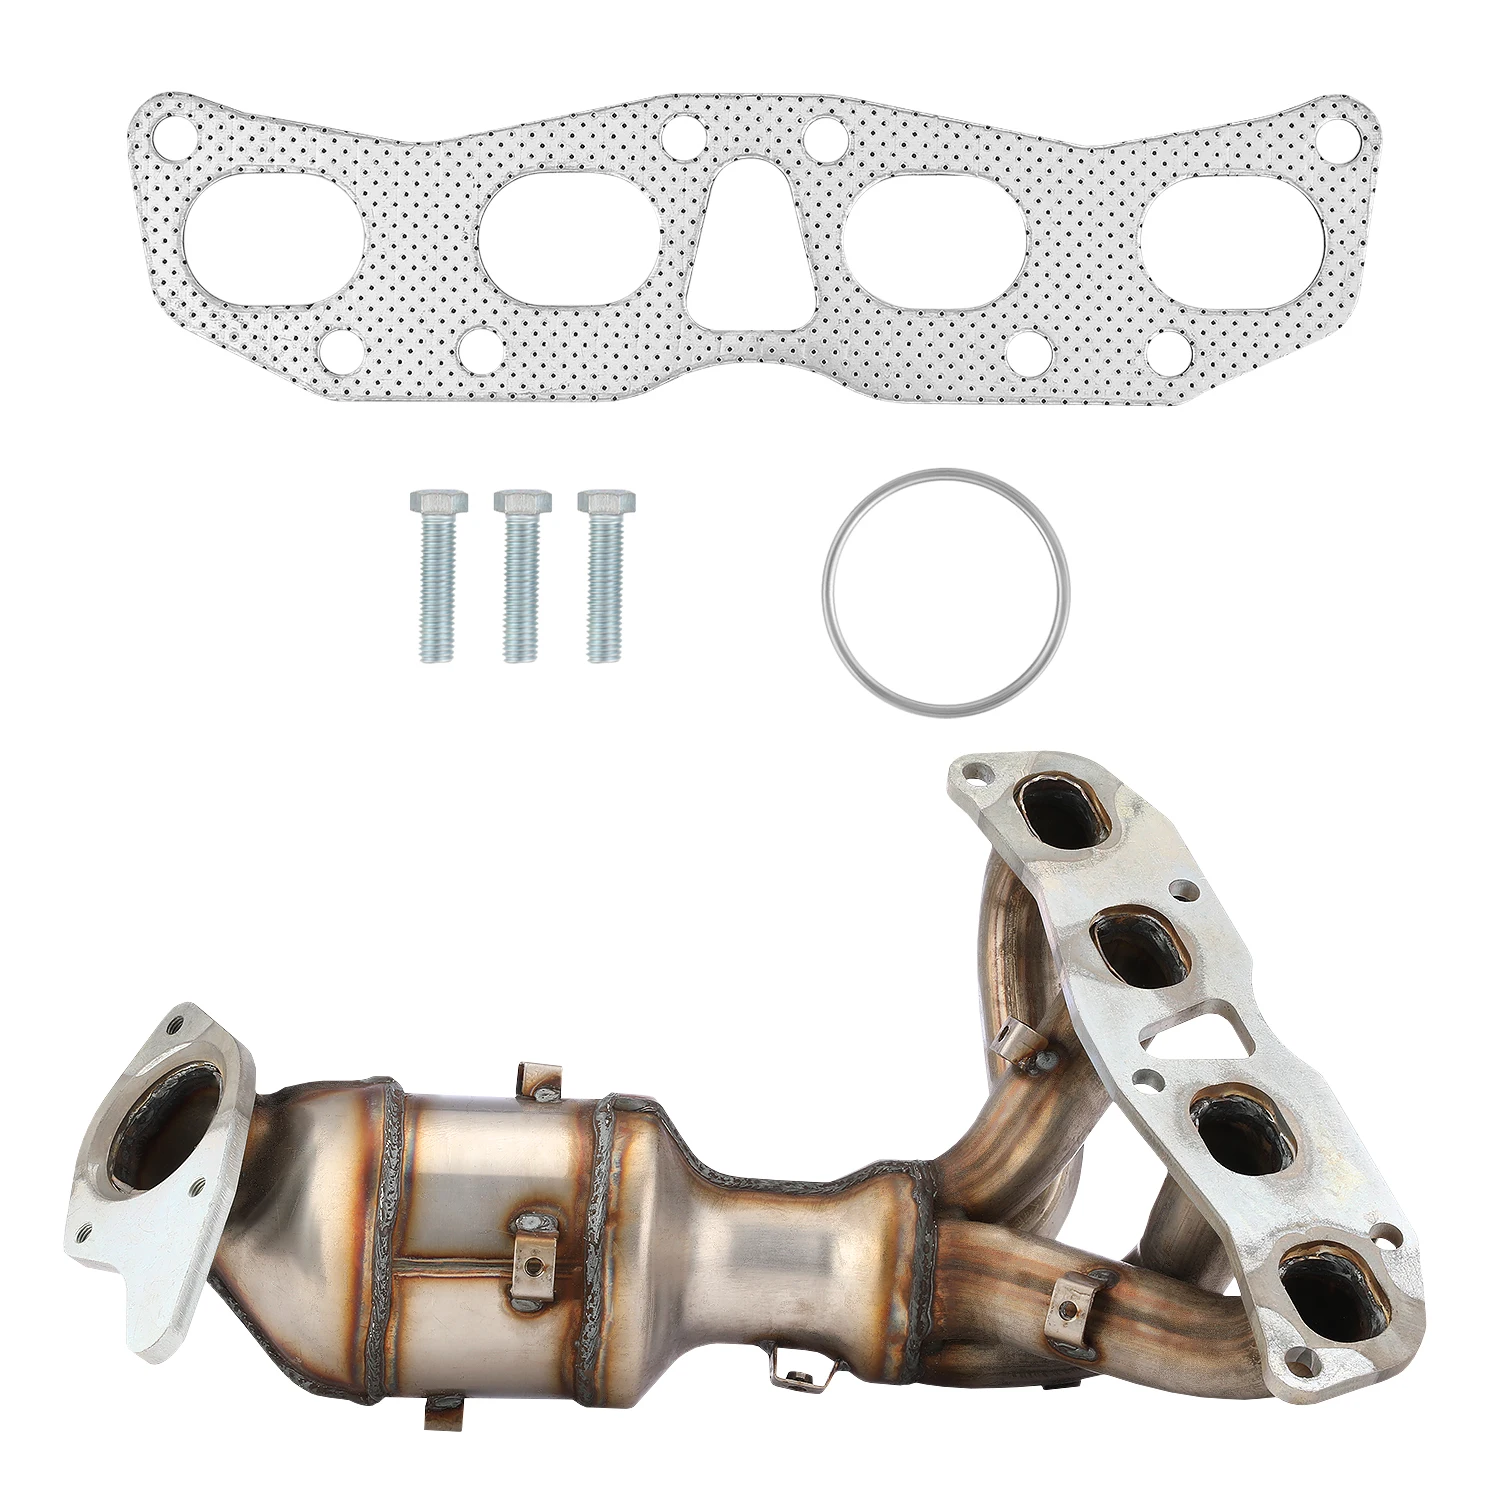 

Catalytic Converter Direct Fit 2007-2012 For Nissan Altima 2.5L Car Exhaust Manifold Factory Style Manifold Systems Mufflers